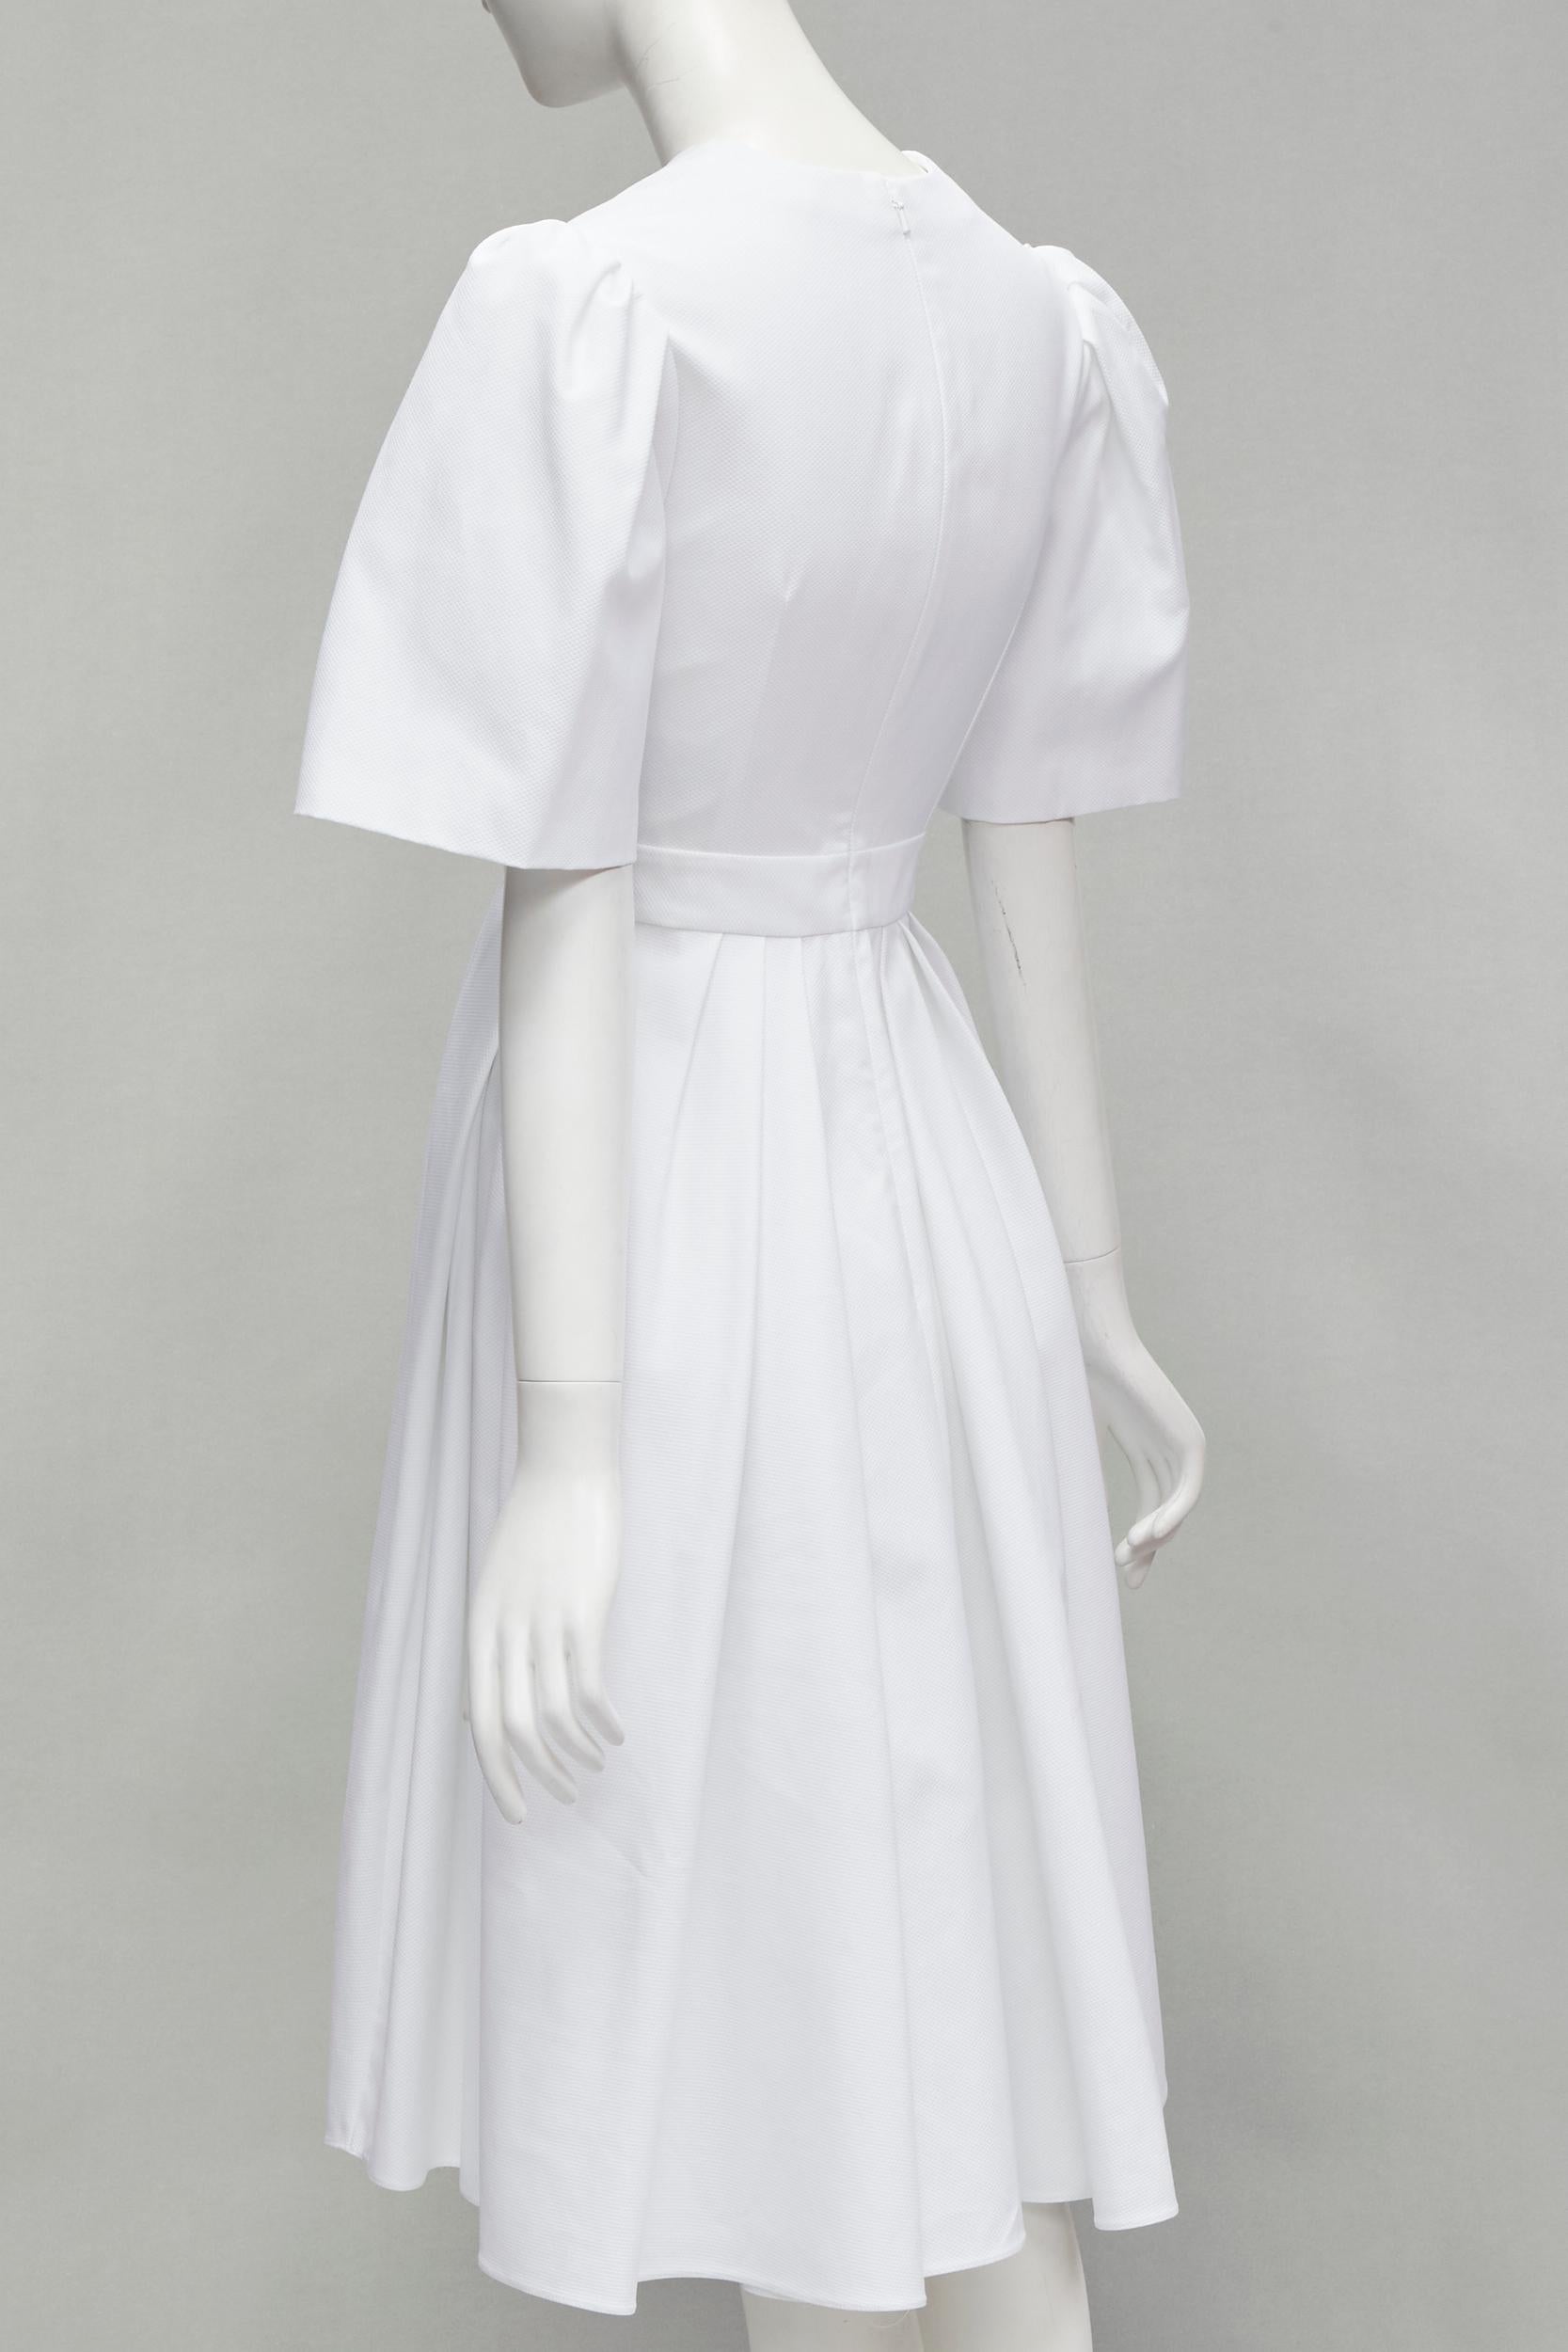 ALEXANDER MCQUEEN white structural bell sleeve V neck midi dress IT38 XS For Sale 1